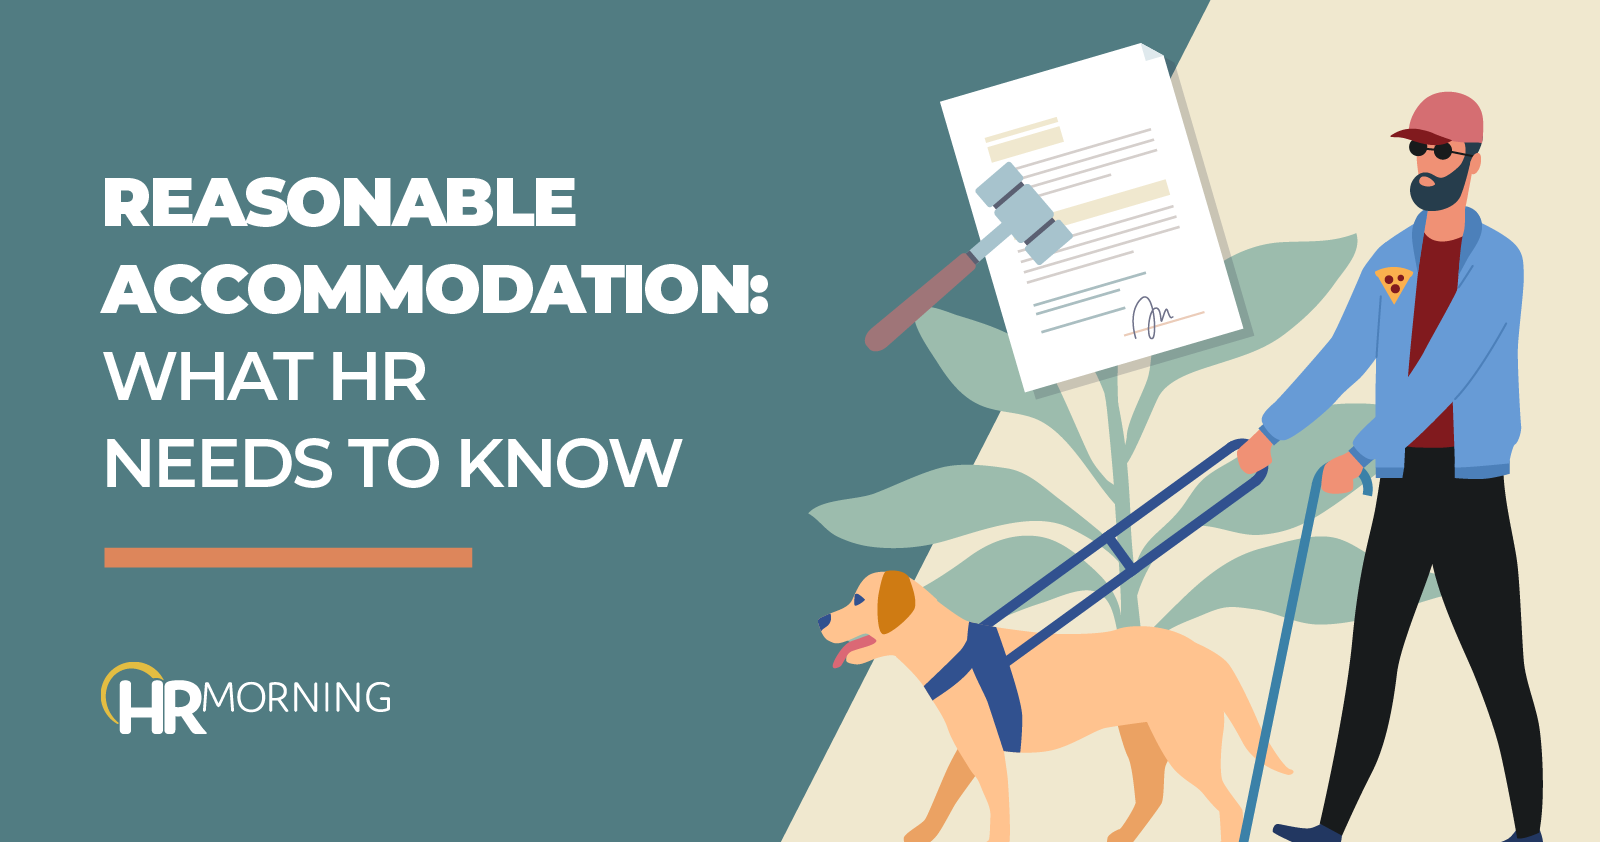 Reasonable accommodation: What HR needs to know